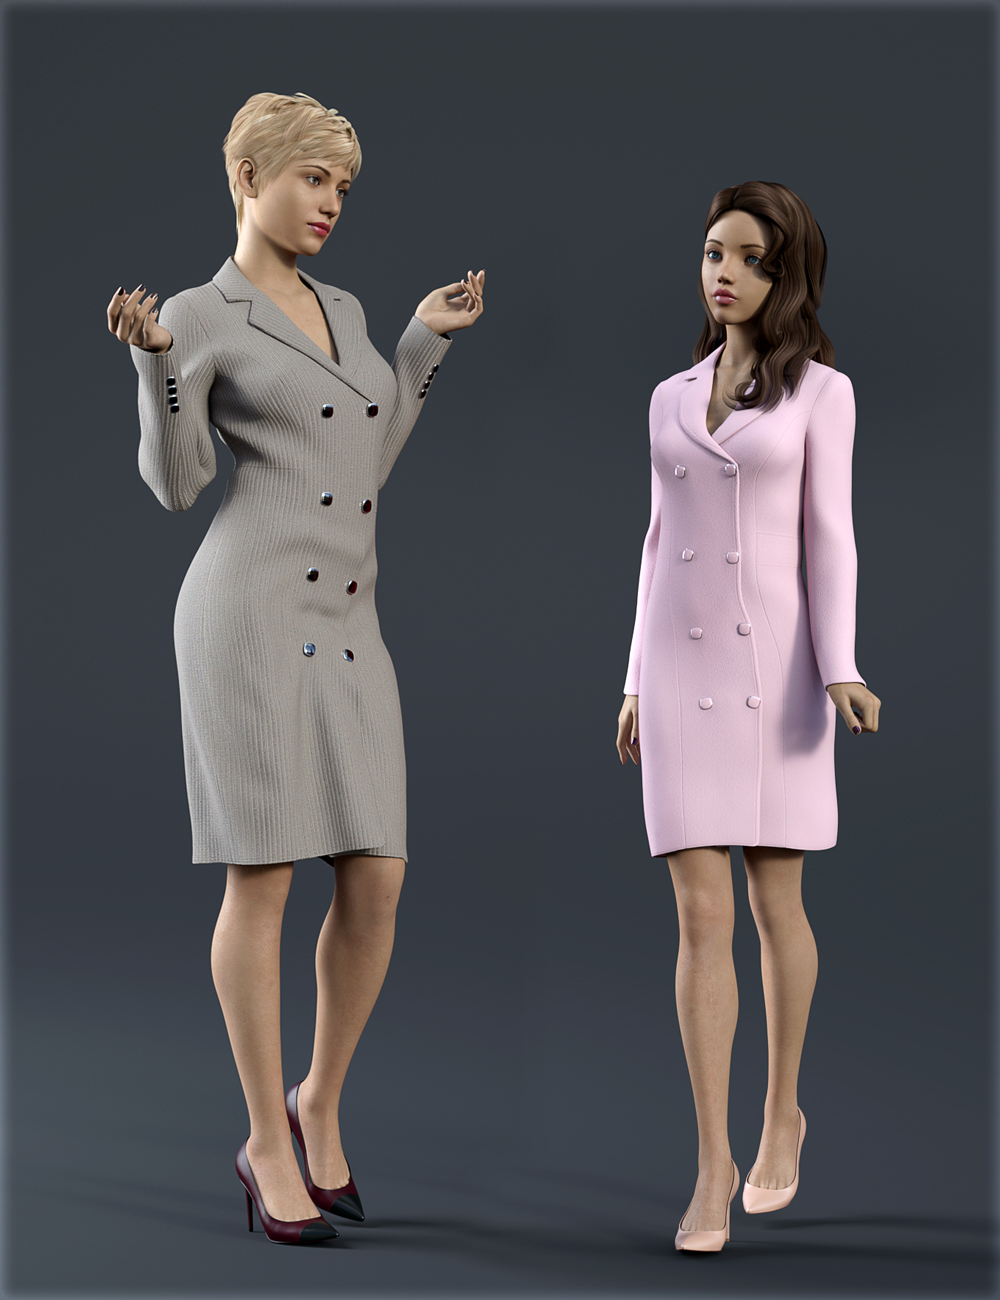 dForce H&C Double Button Dress for Genesis 8 Female(s) by: IH Kang, 3D Models by Daz 3D